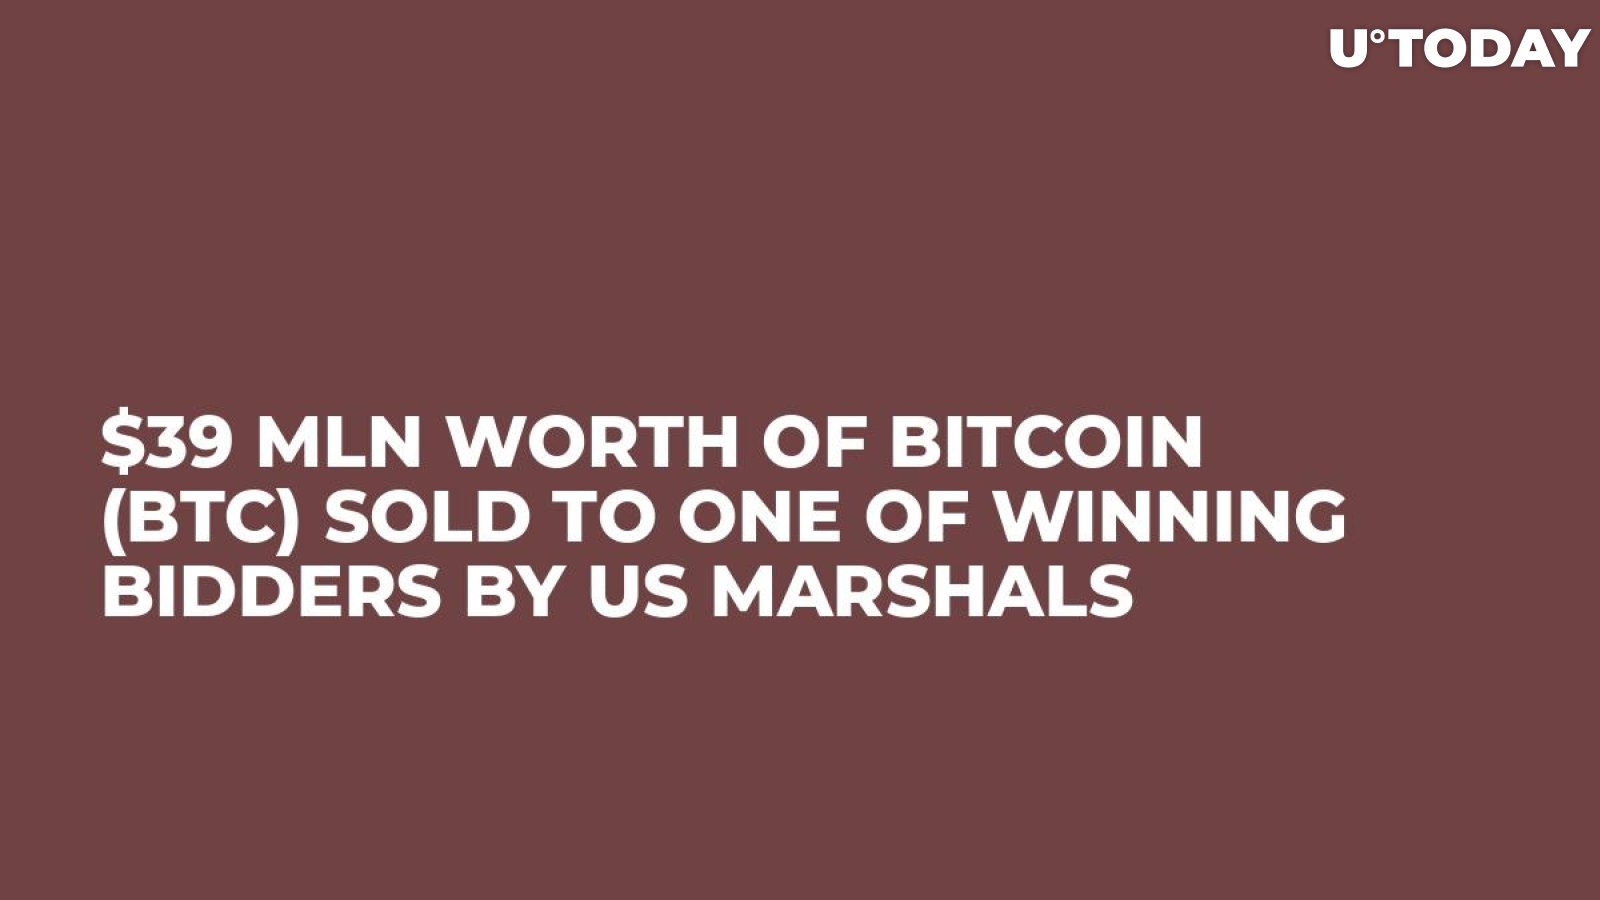 $39 Mln Worth of Bitcoin (BTC) Sold to One of Winning Bidders by US Marshals